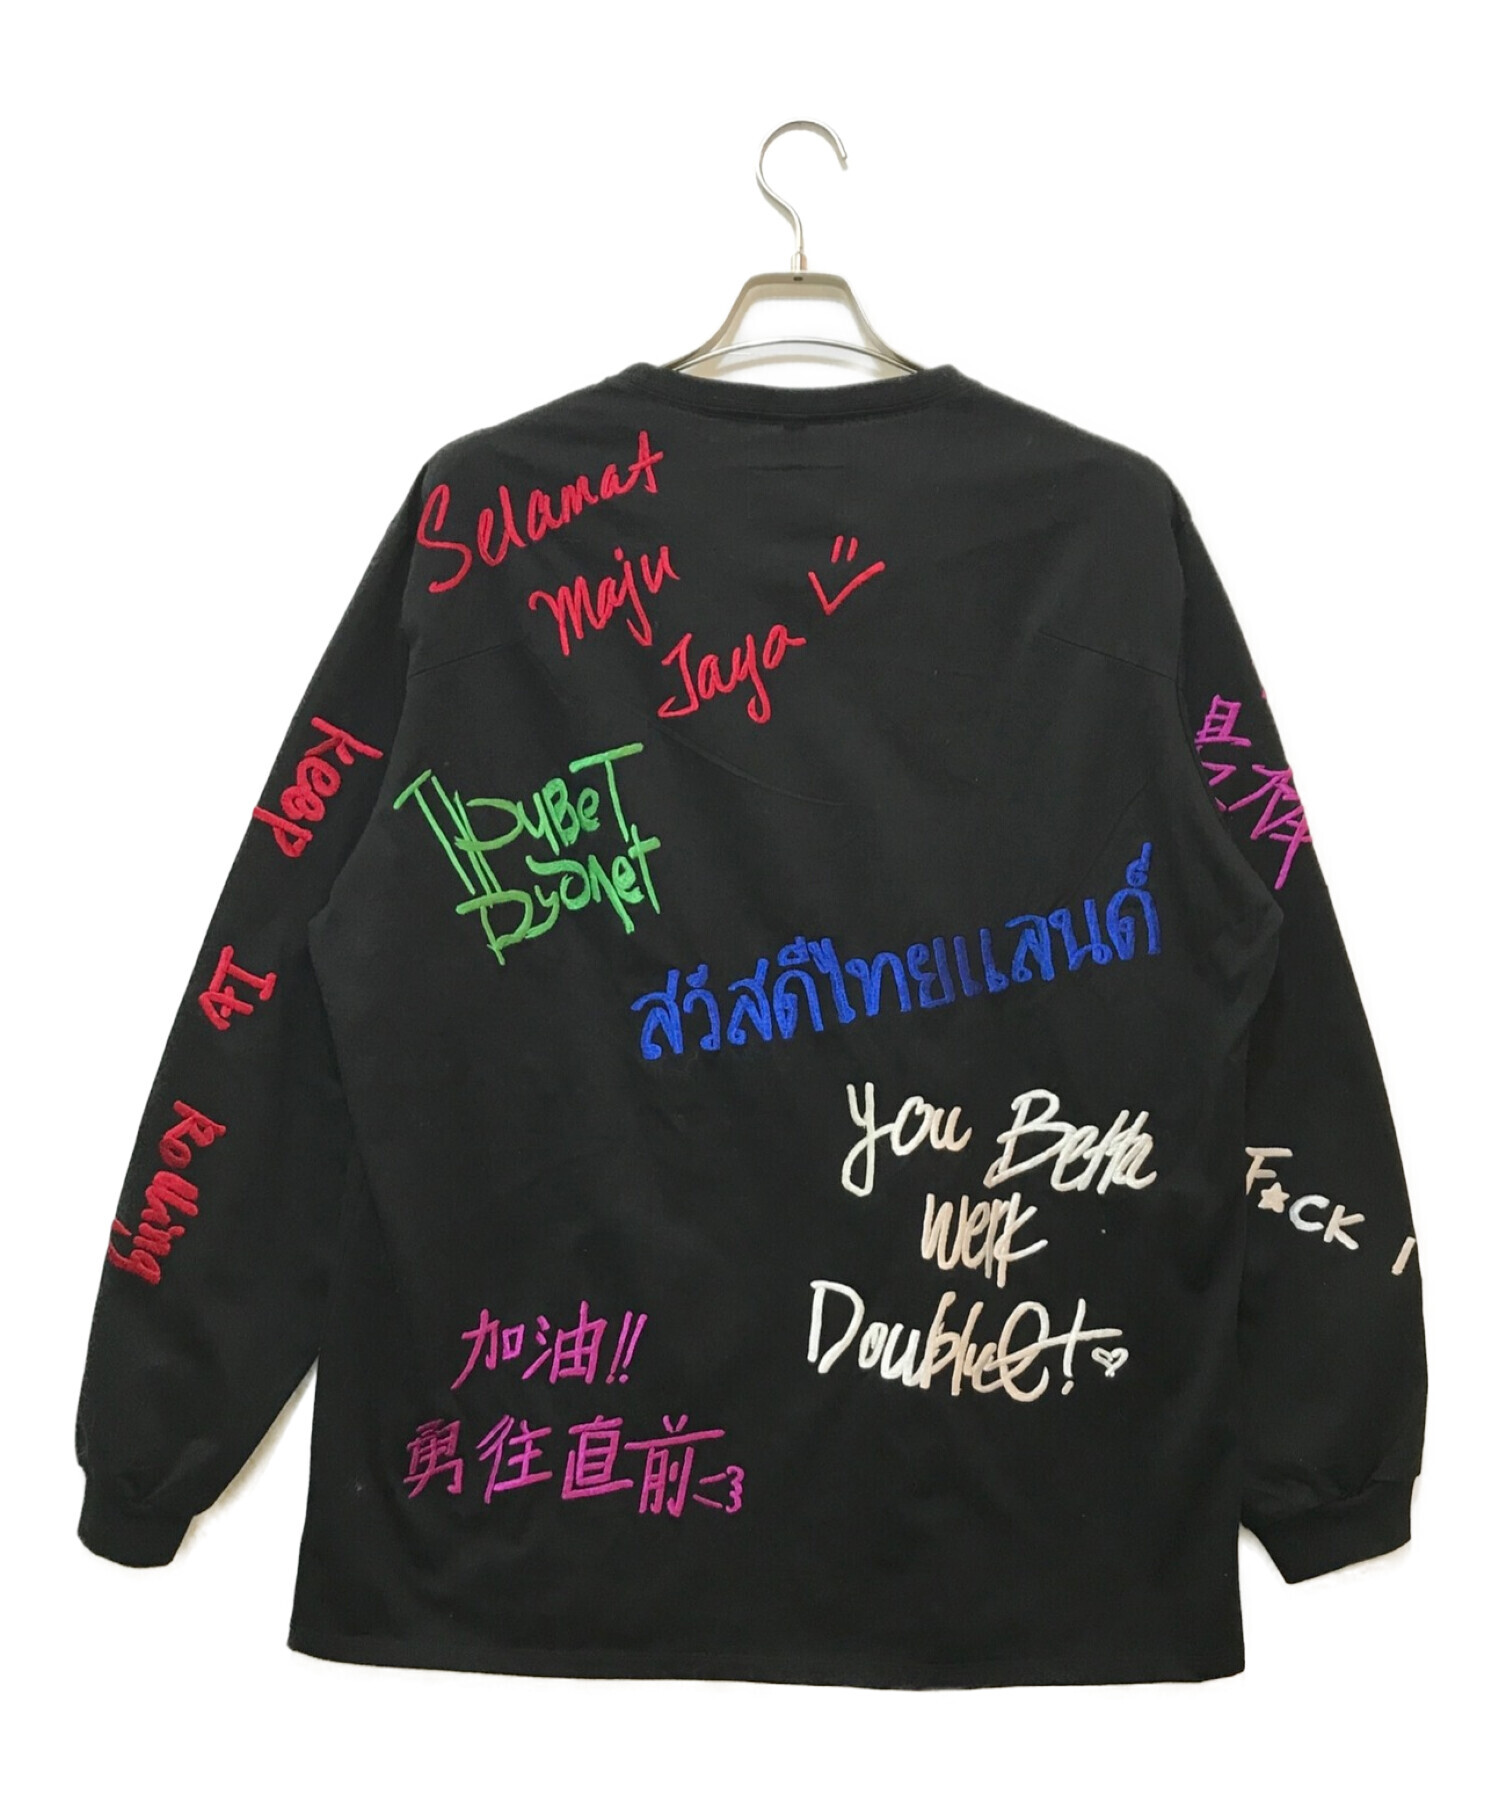 doublet (ダブレット) EMBROIDERED PFW DOUBLET LONGSLEEVE ブラック サイズ:M